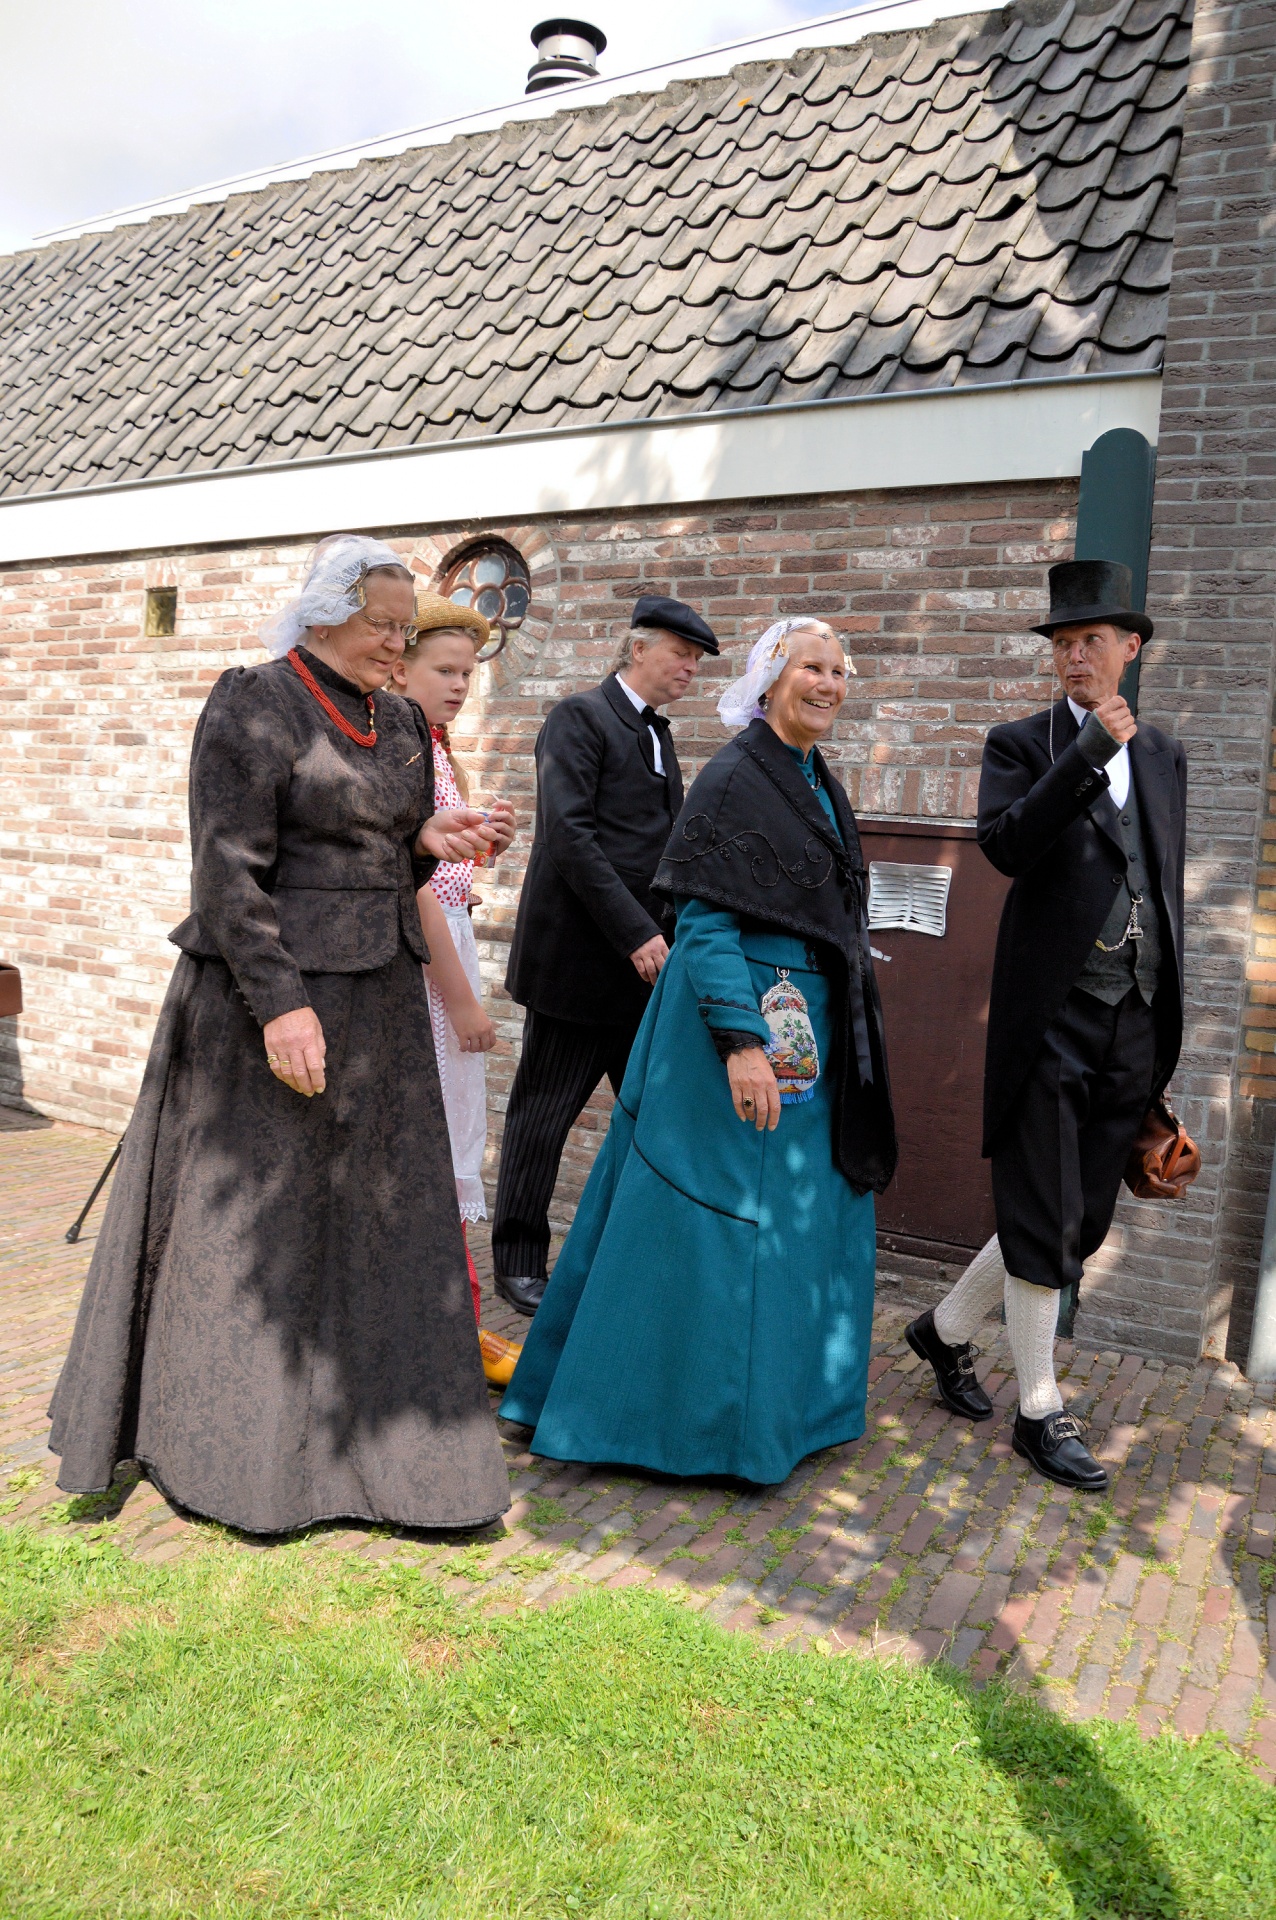 Download free photo of Folklore,north holland,netherlands,costumes ...